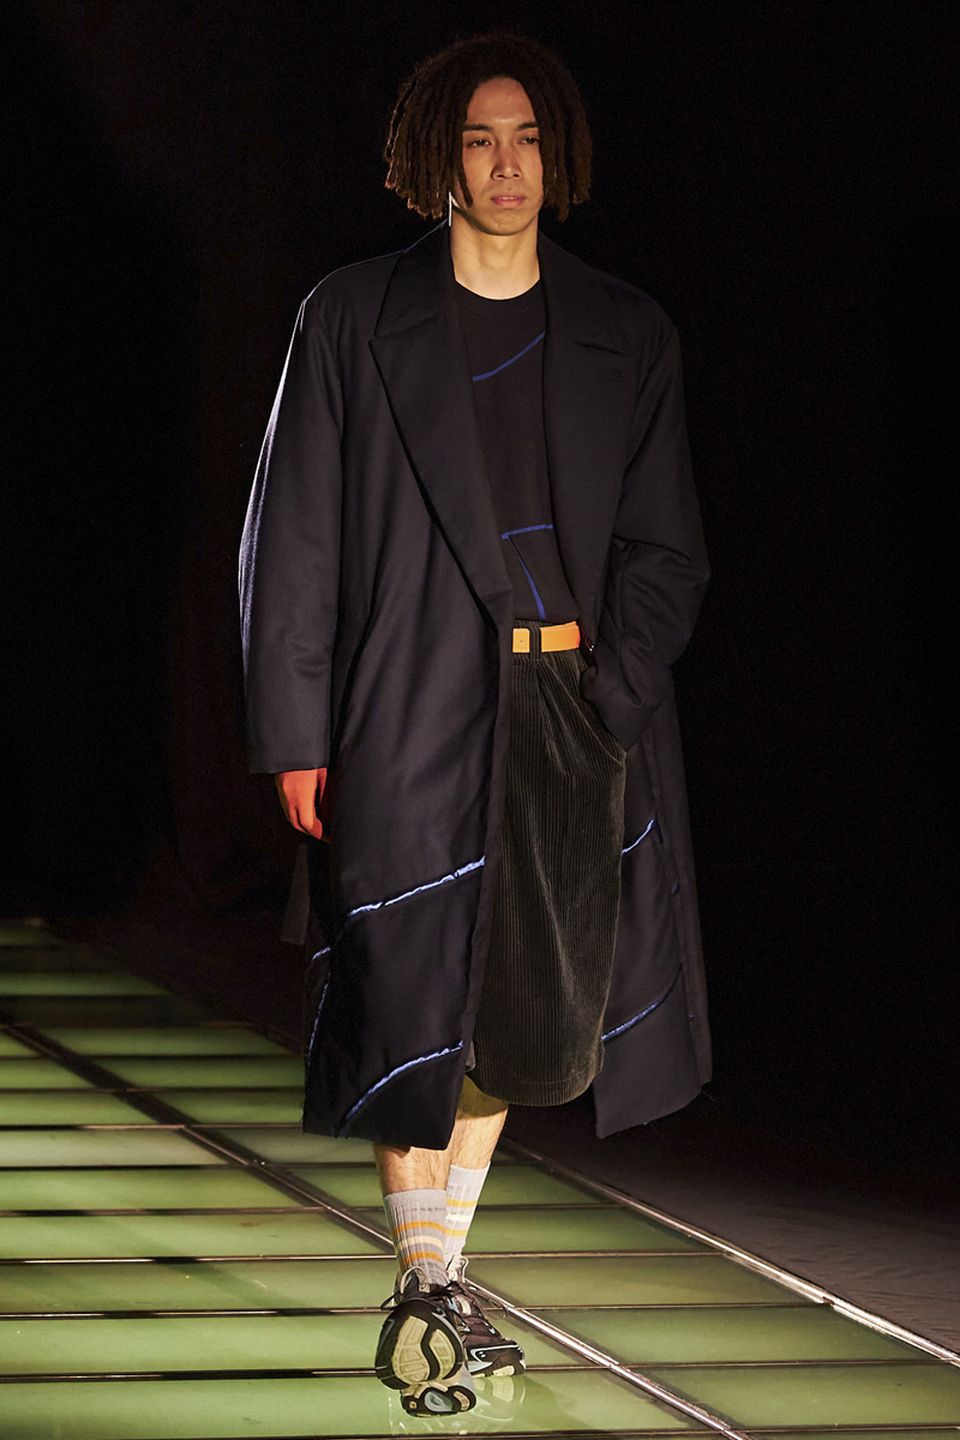 KUON's FW22 Collection Is a Celebration of Japanese Craft